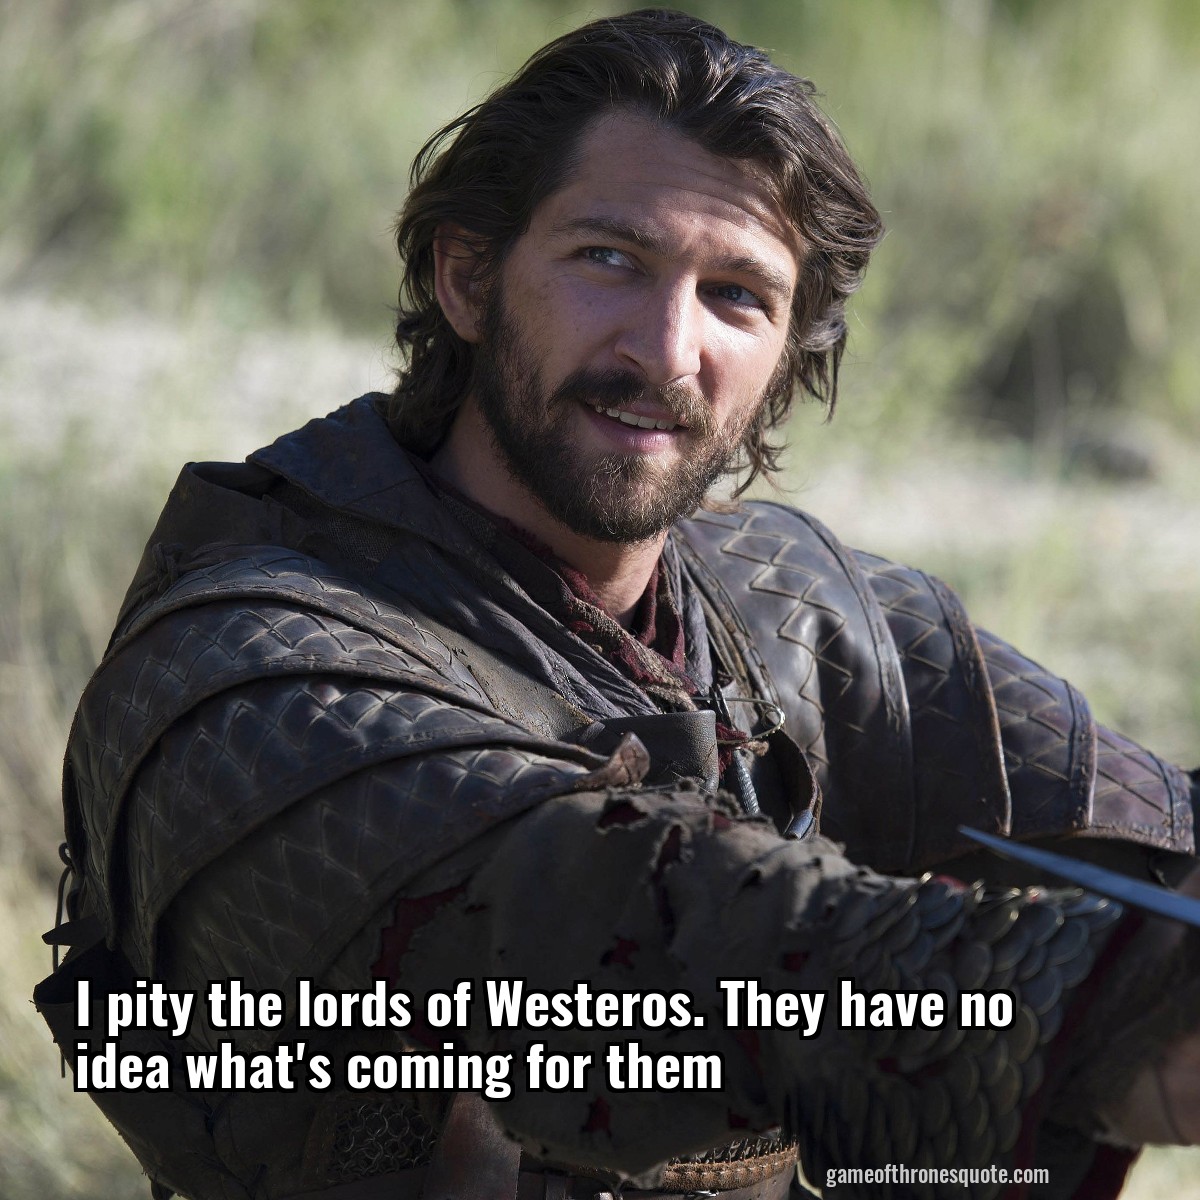 I pity the lords of Westeros. They have no idea what's coming for them